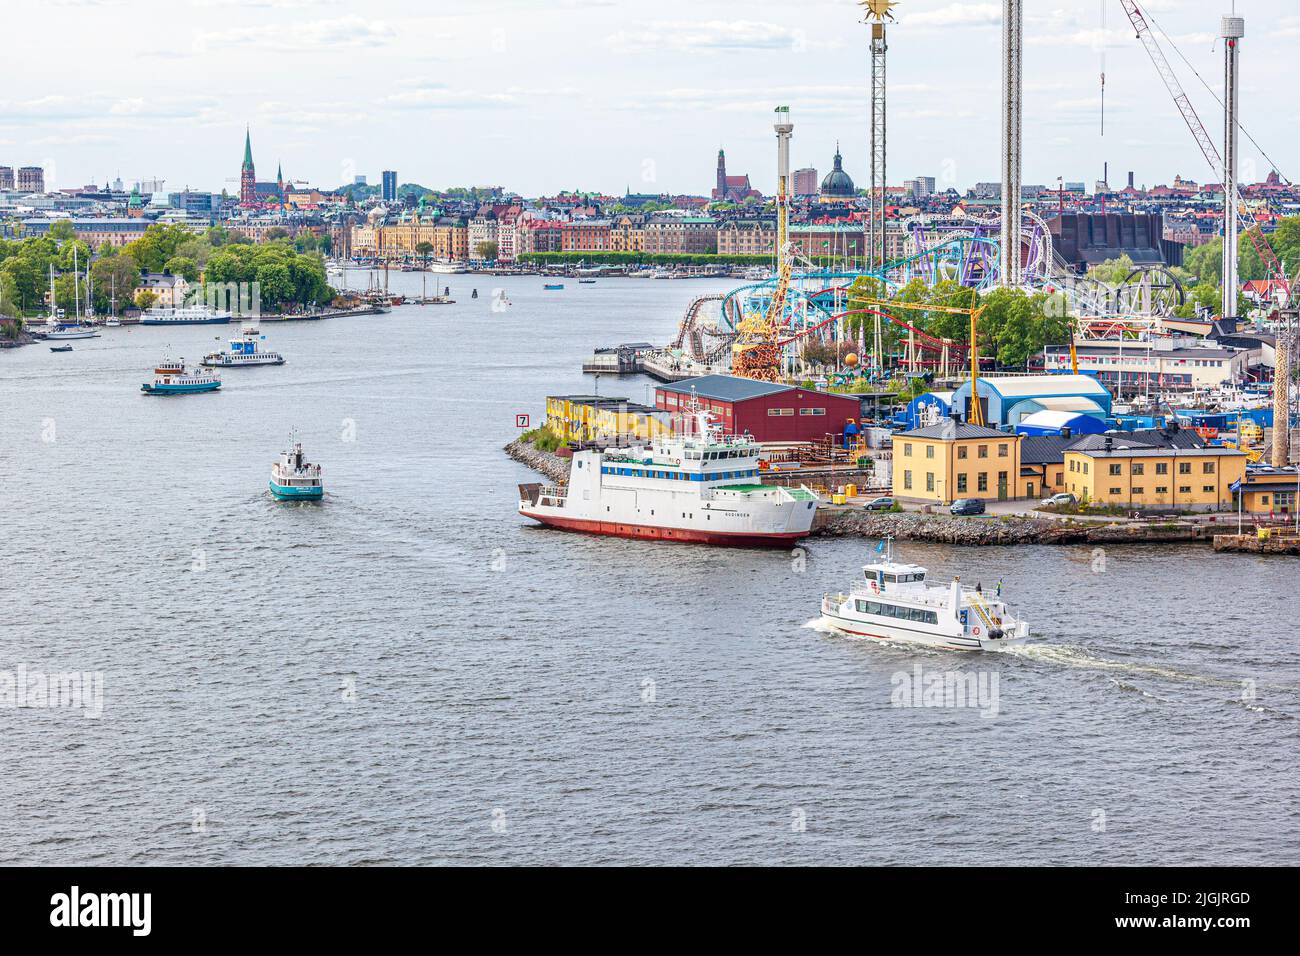 The Gröna Lund Theme Park on Djurgården Island in the Stockholm Archipelago, Sweden. The city of Stockholm is in the background. Stock Photo